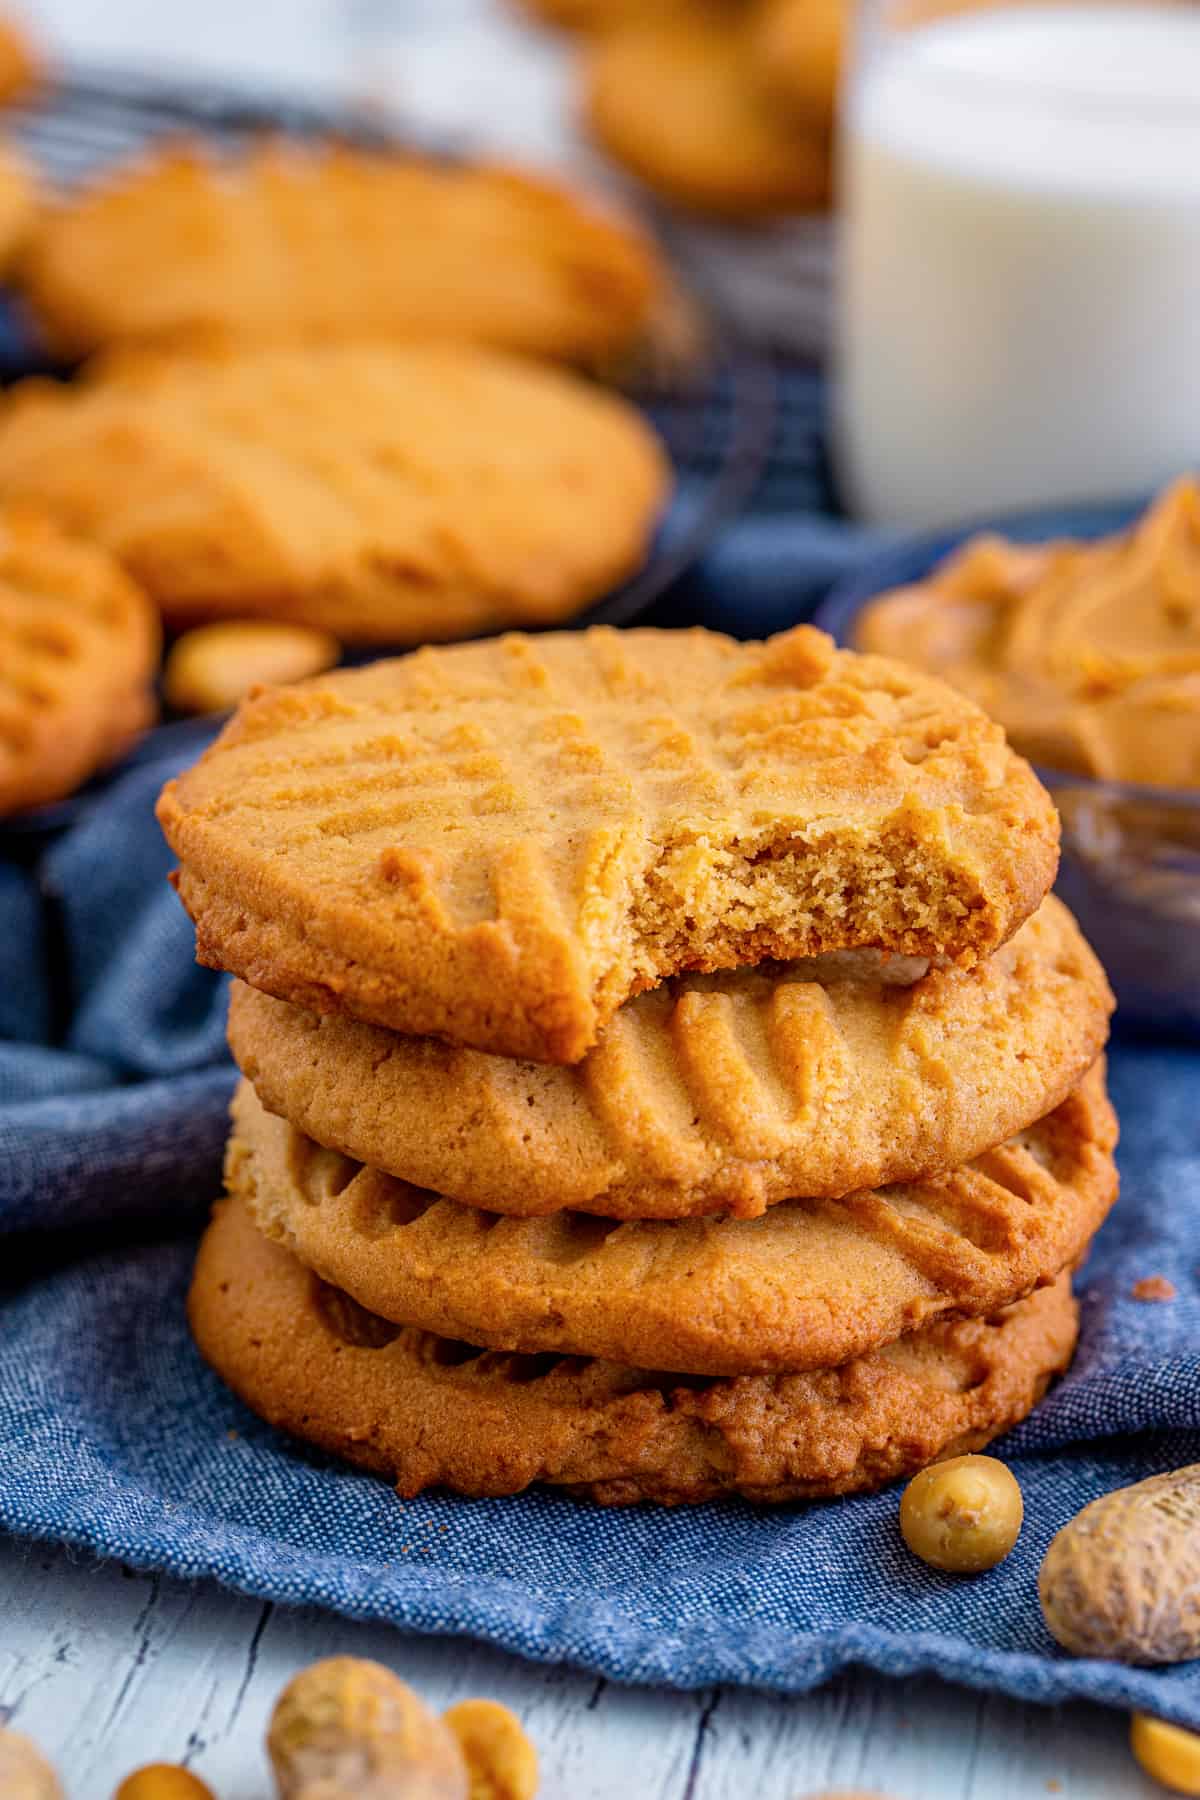 Old-fashioned peanut butter cookies with fork prong lattice on top. One cookie has a bite taken out of it to show crisp texture.